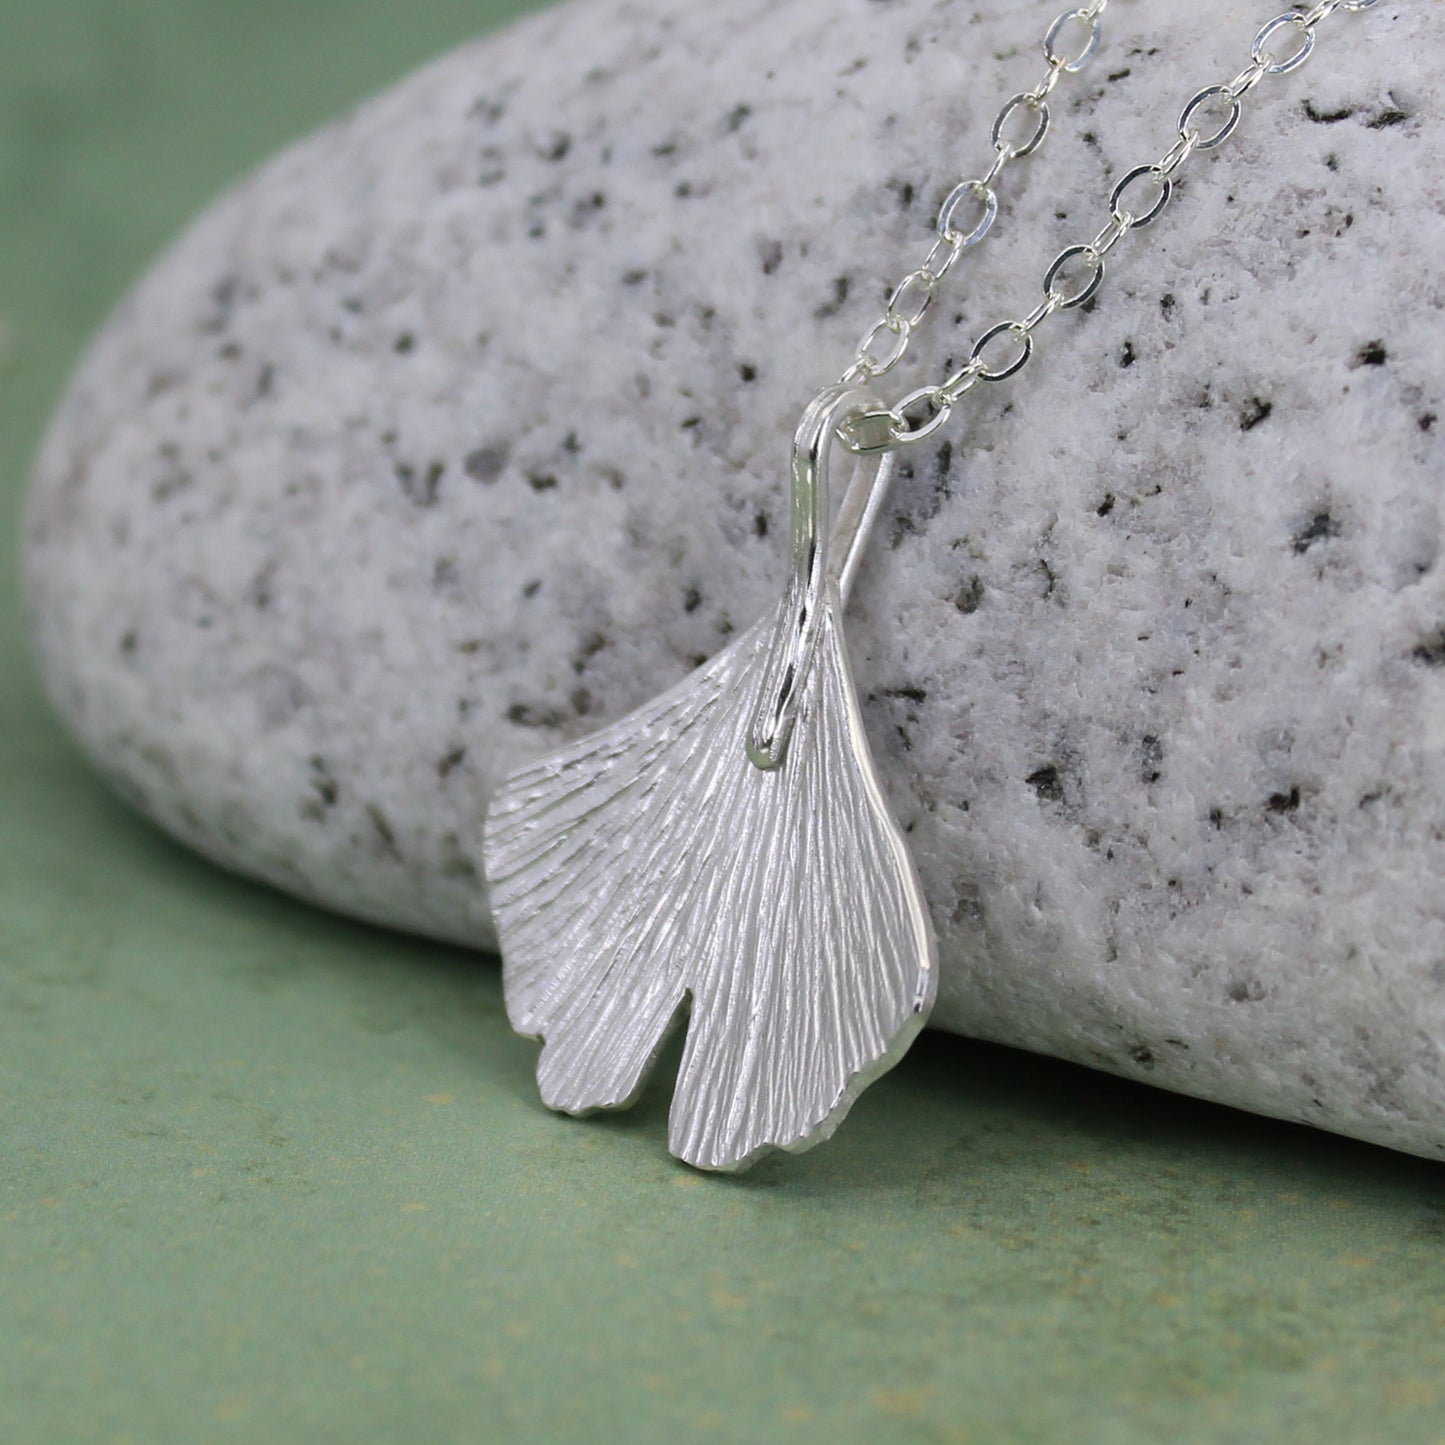 Small ginkgo leaf necklace